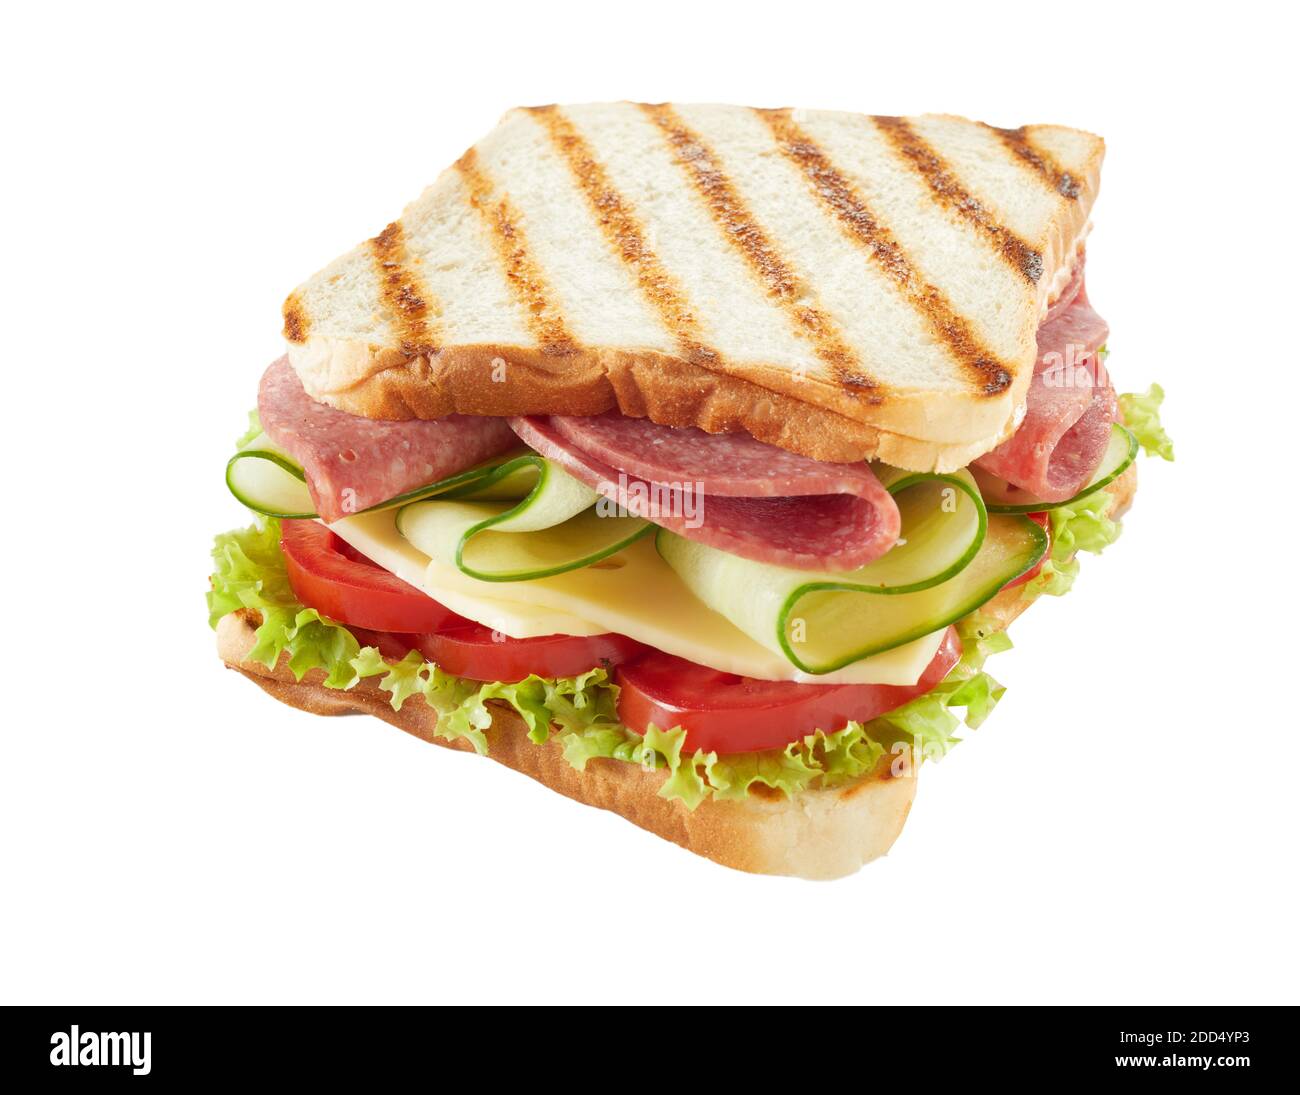 Hearty cheese and spicy salami sandwich with salad trimmings on grilled white bread isolated on white for menu advertising Stock Photo